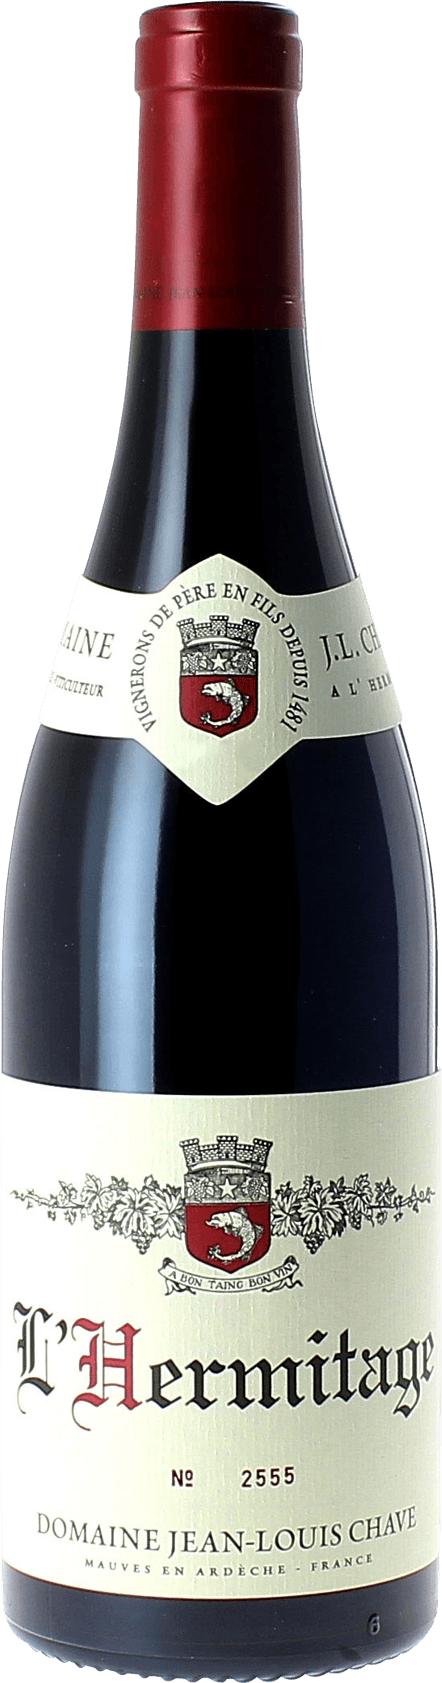 Hermitage rouge jean-louis chave 2017  Hermitage, Valle du Rhne Rouge